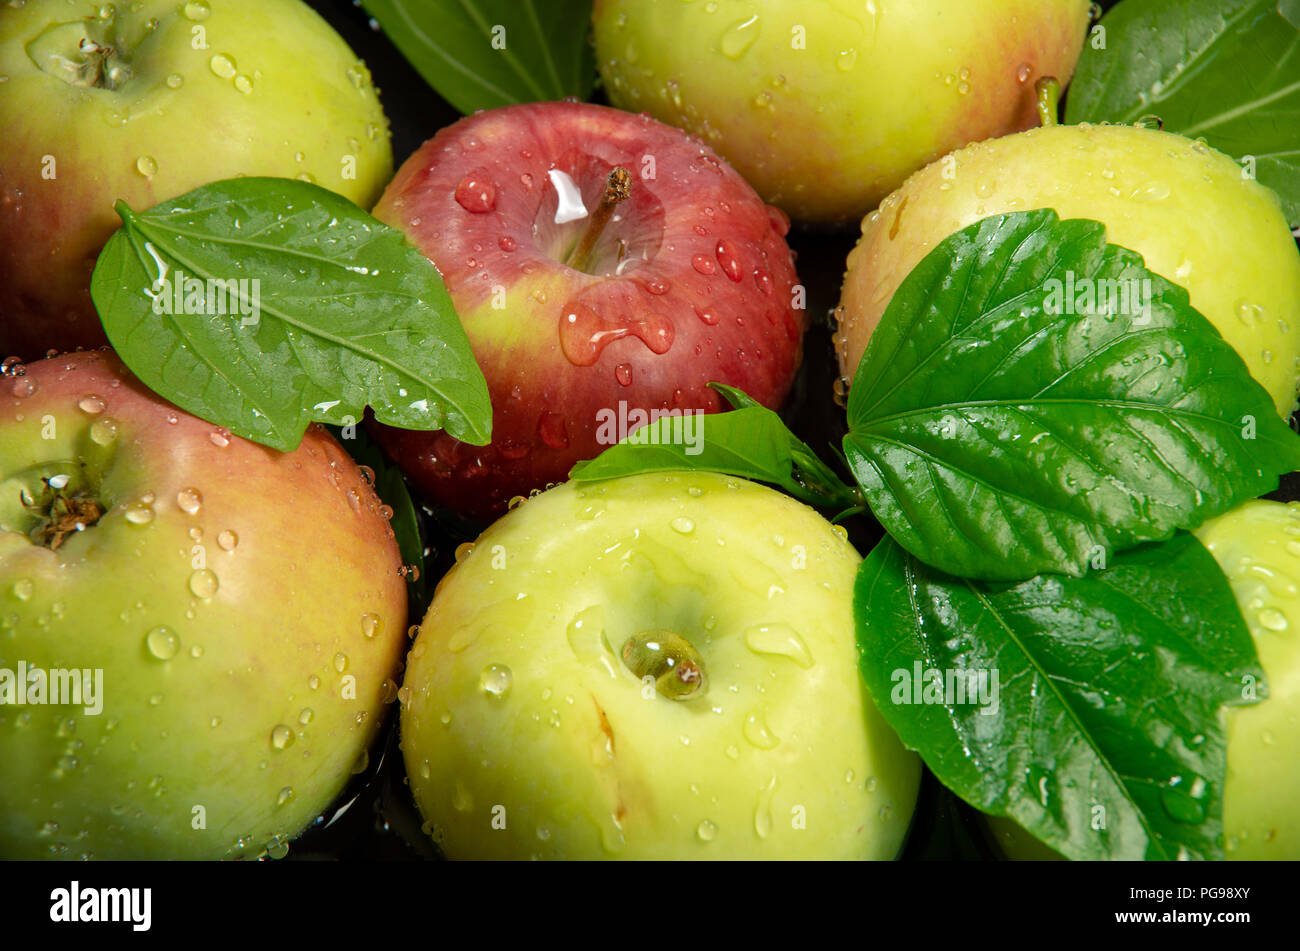 Summer apples with water drops after washing, top view close-up Stock Photo